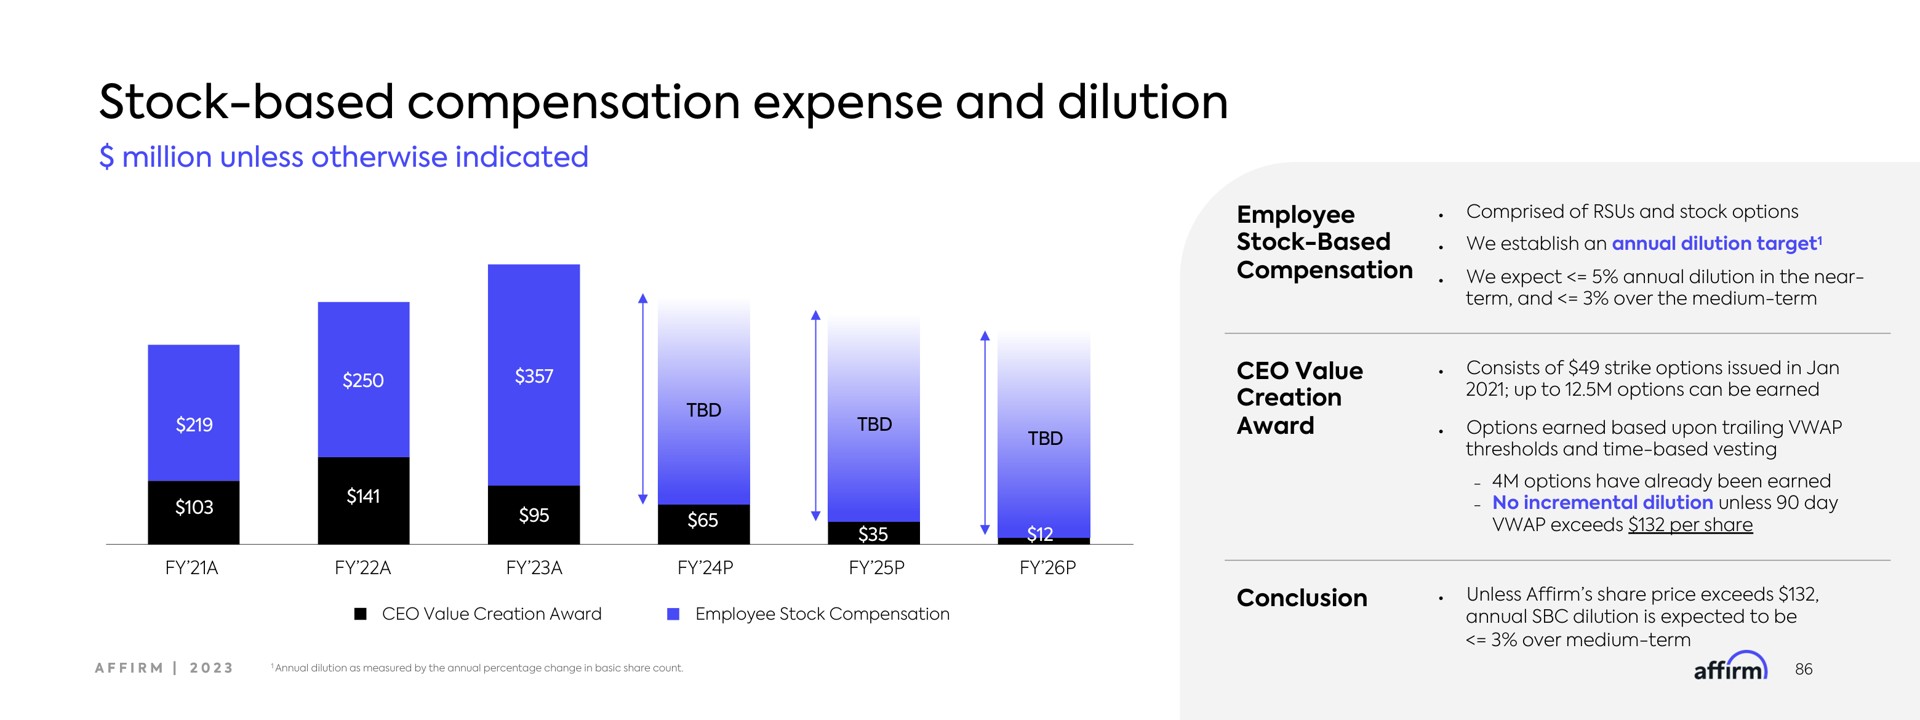 stock based compensation expense and dilution | Affirm